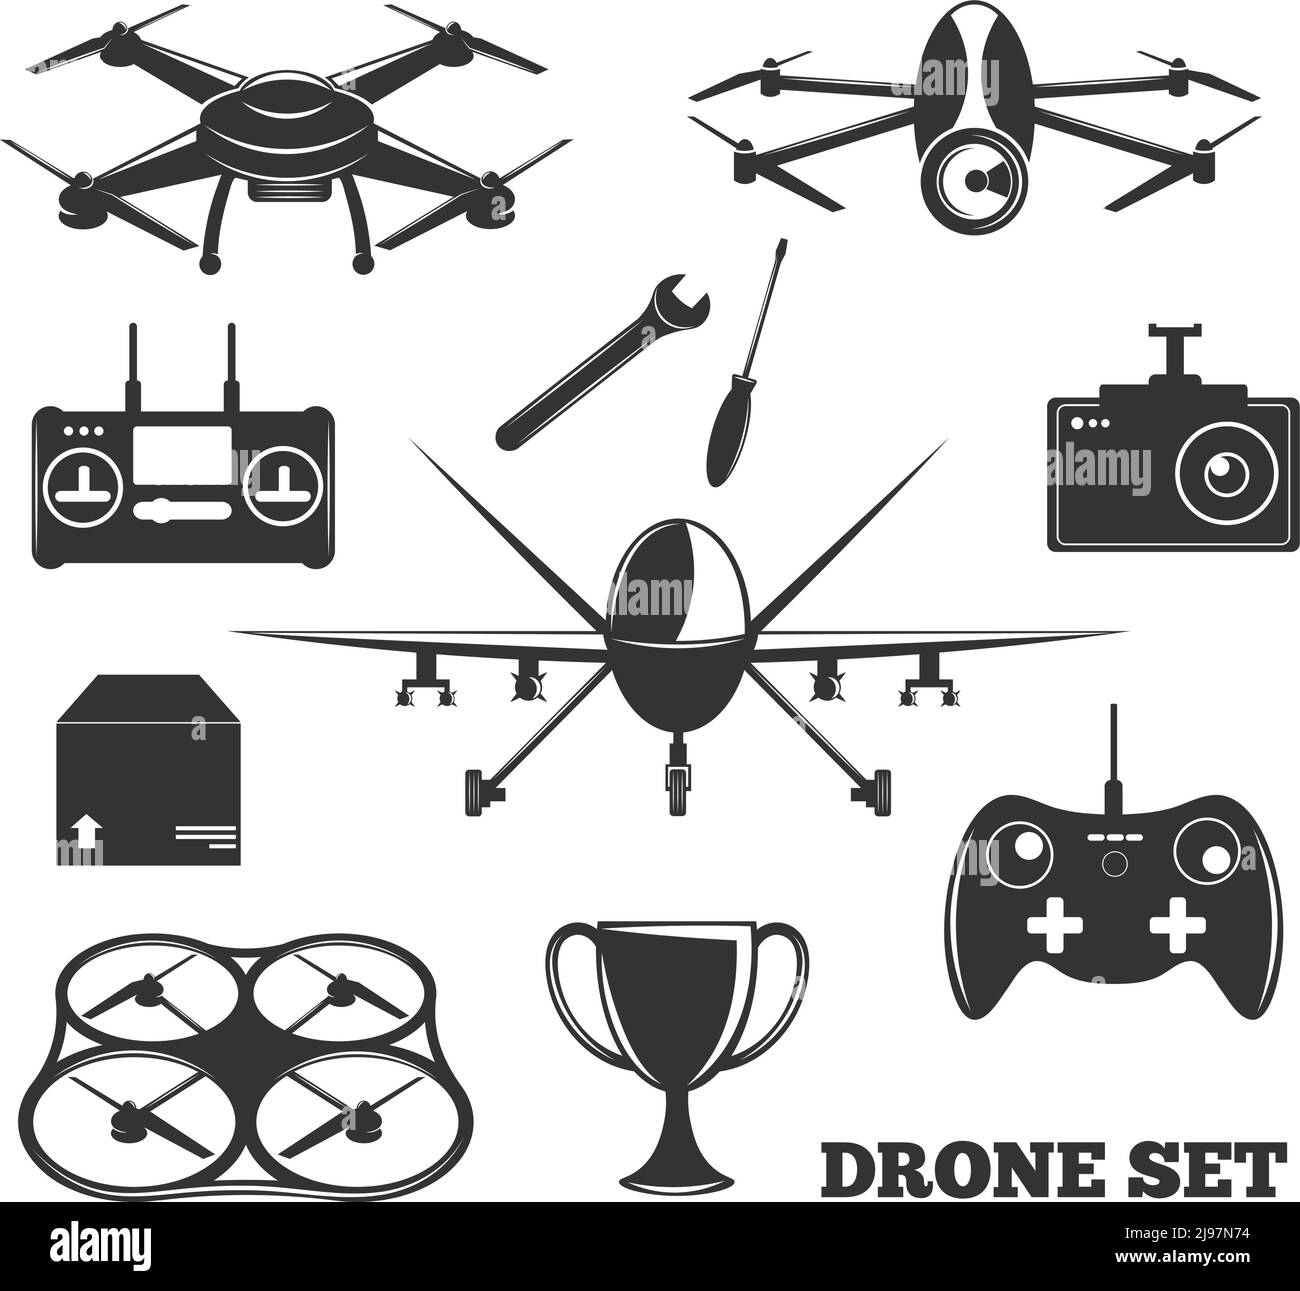 Monochrome set of drone elements with controller, photo camera, repair tools, package, trophy isolated vector illustration Stock Vector